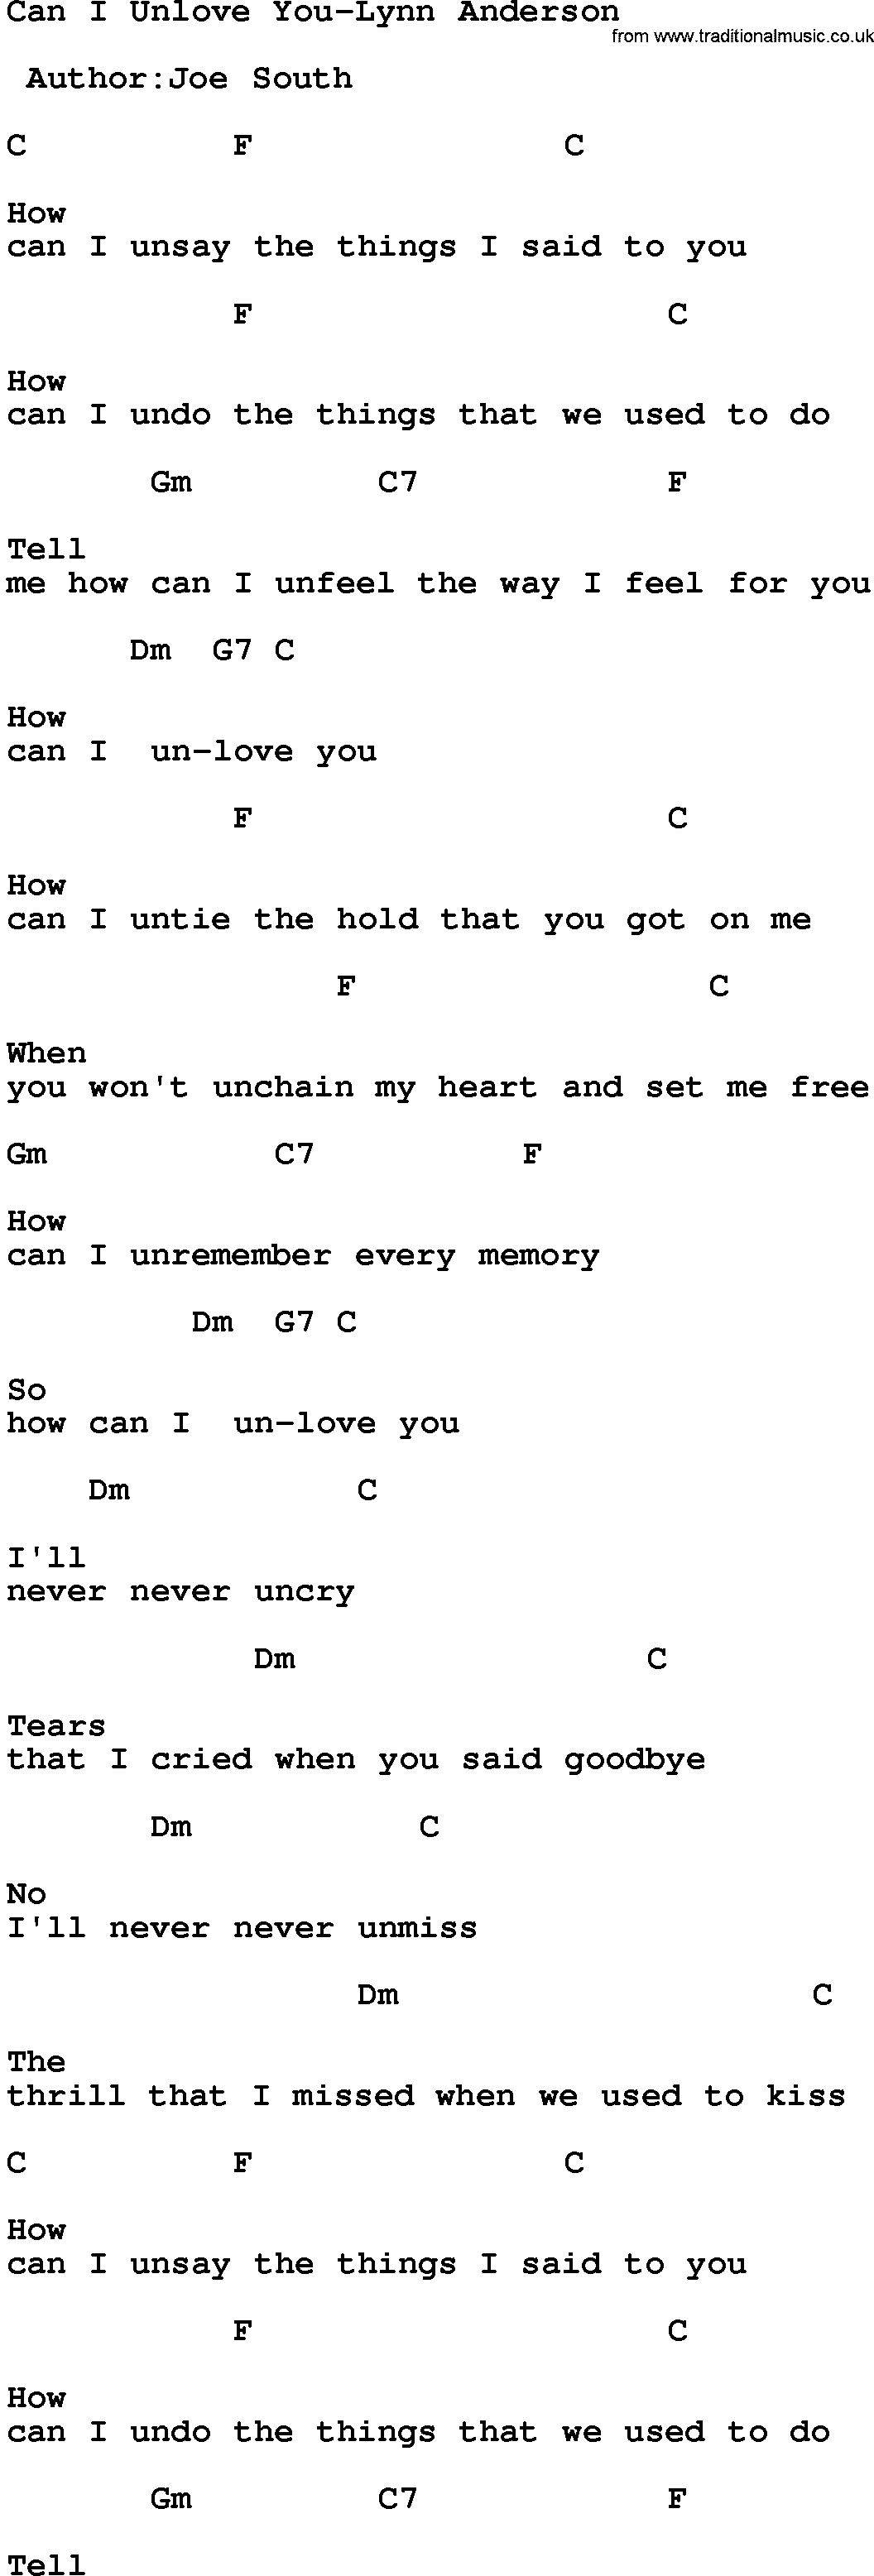 Country music song: Can I Unlove You-Lynn Anderson lyrics and chords